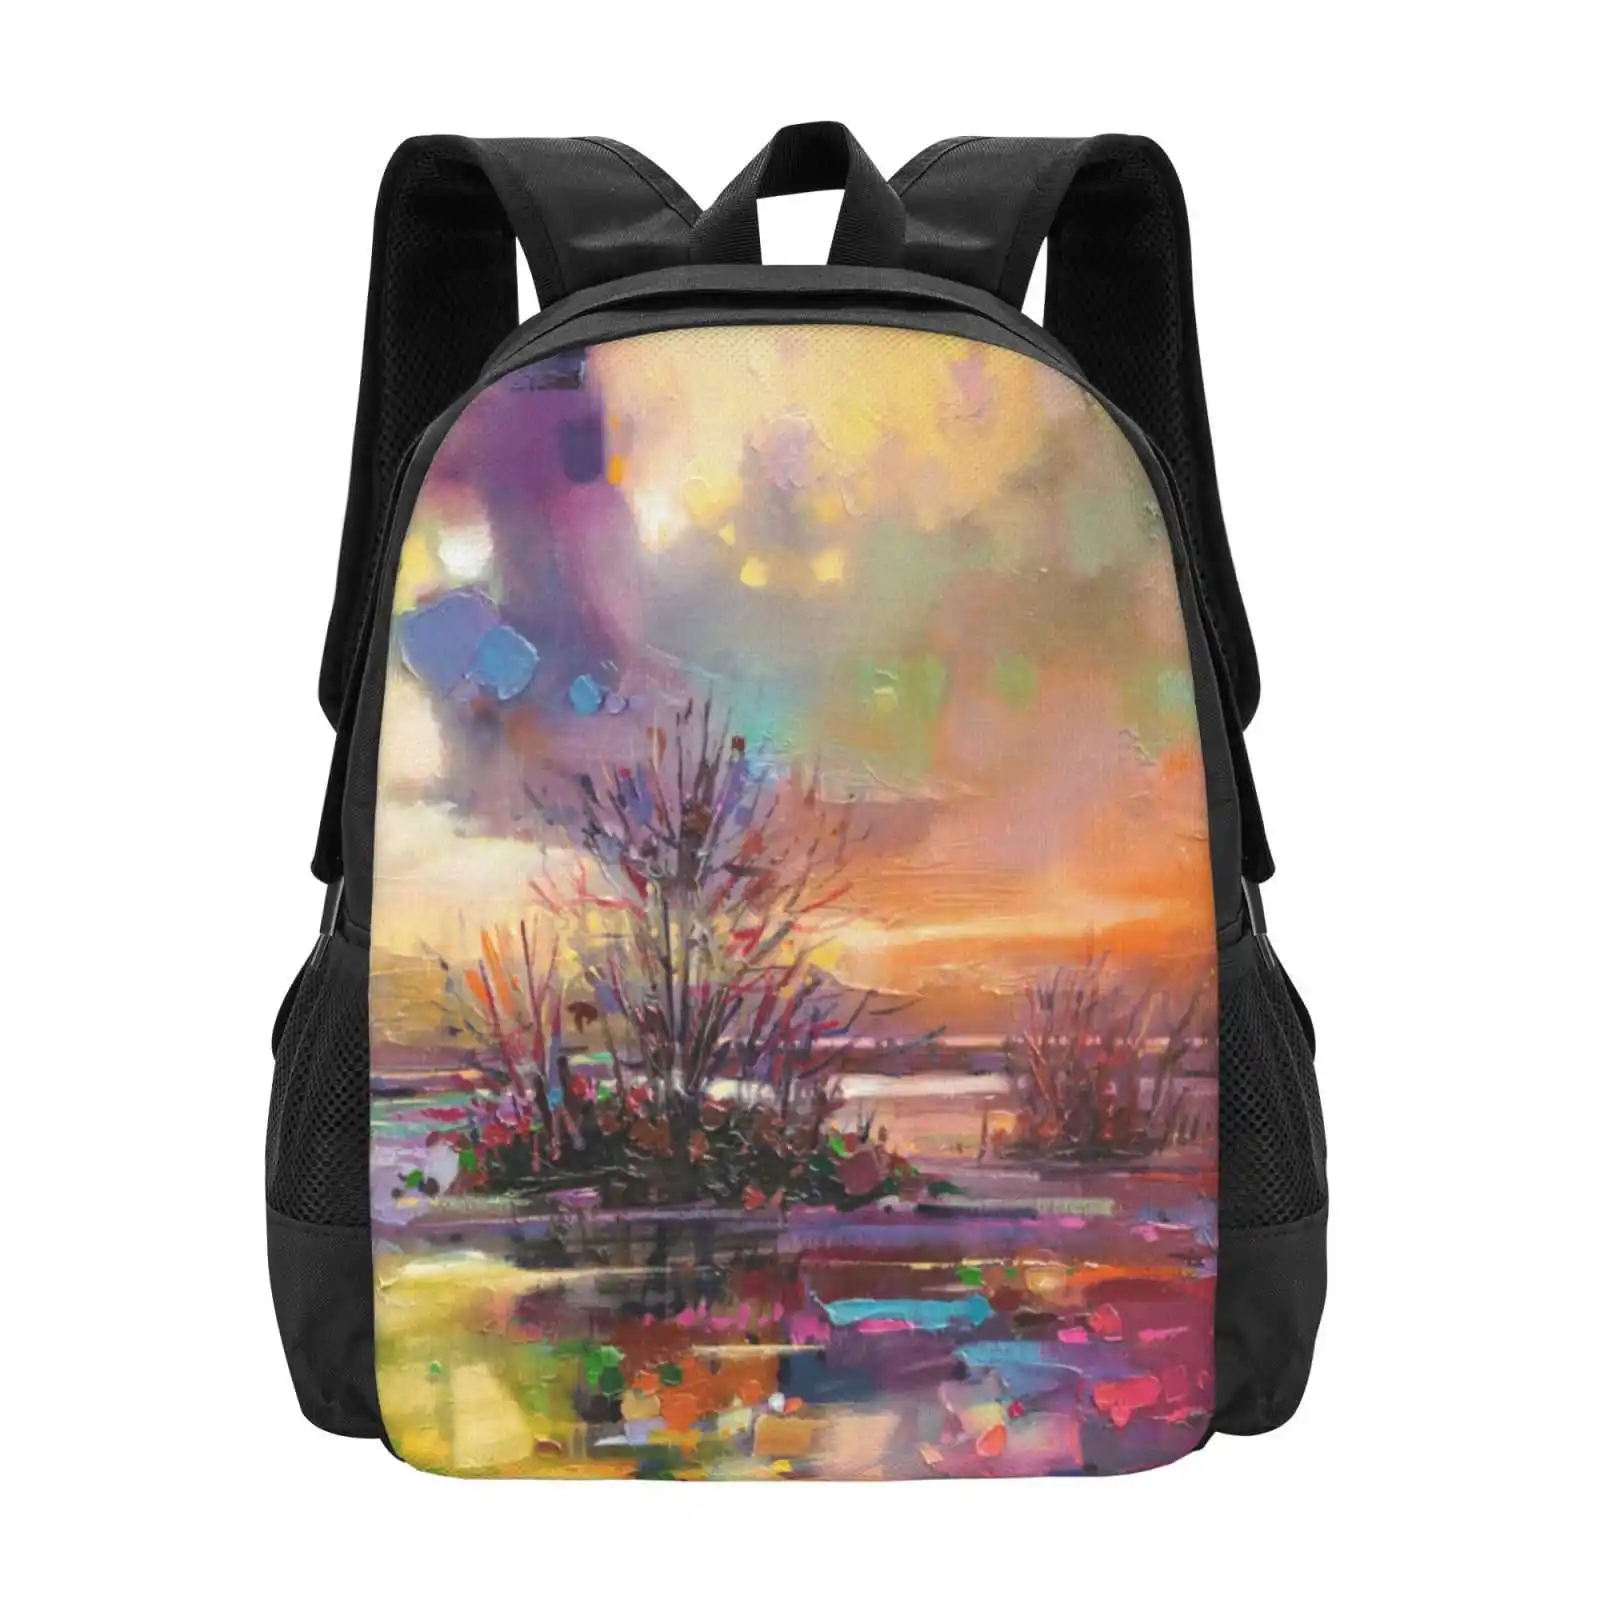 

Loch Fyne Colour Hot Sale Backpack Fashion Bags Loch Fyne Landscape Scottish Abstract Atmospheric Scotland Colourful Clouds Sky